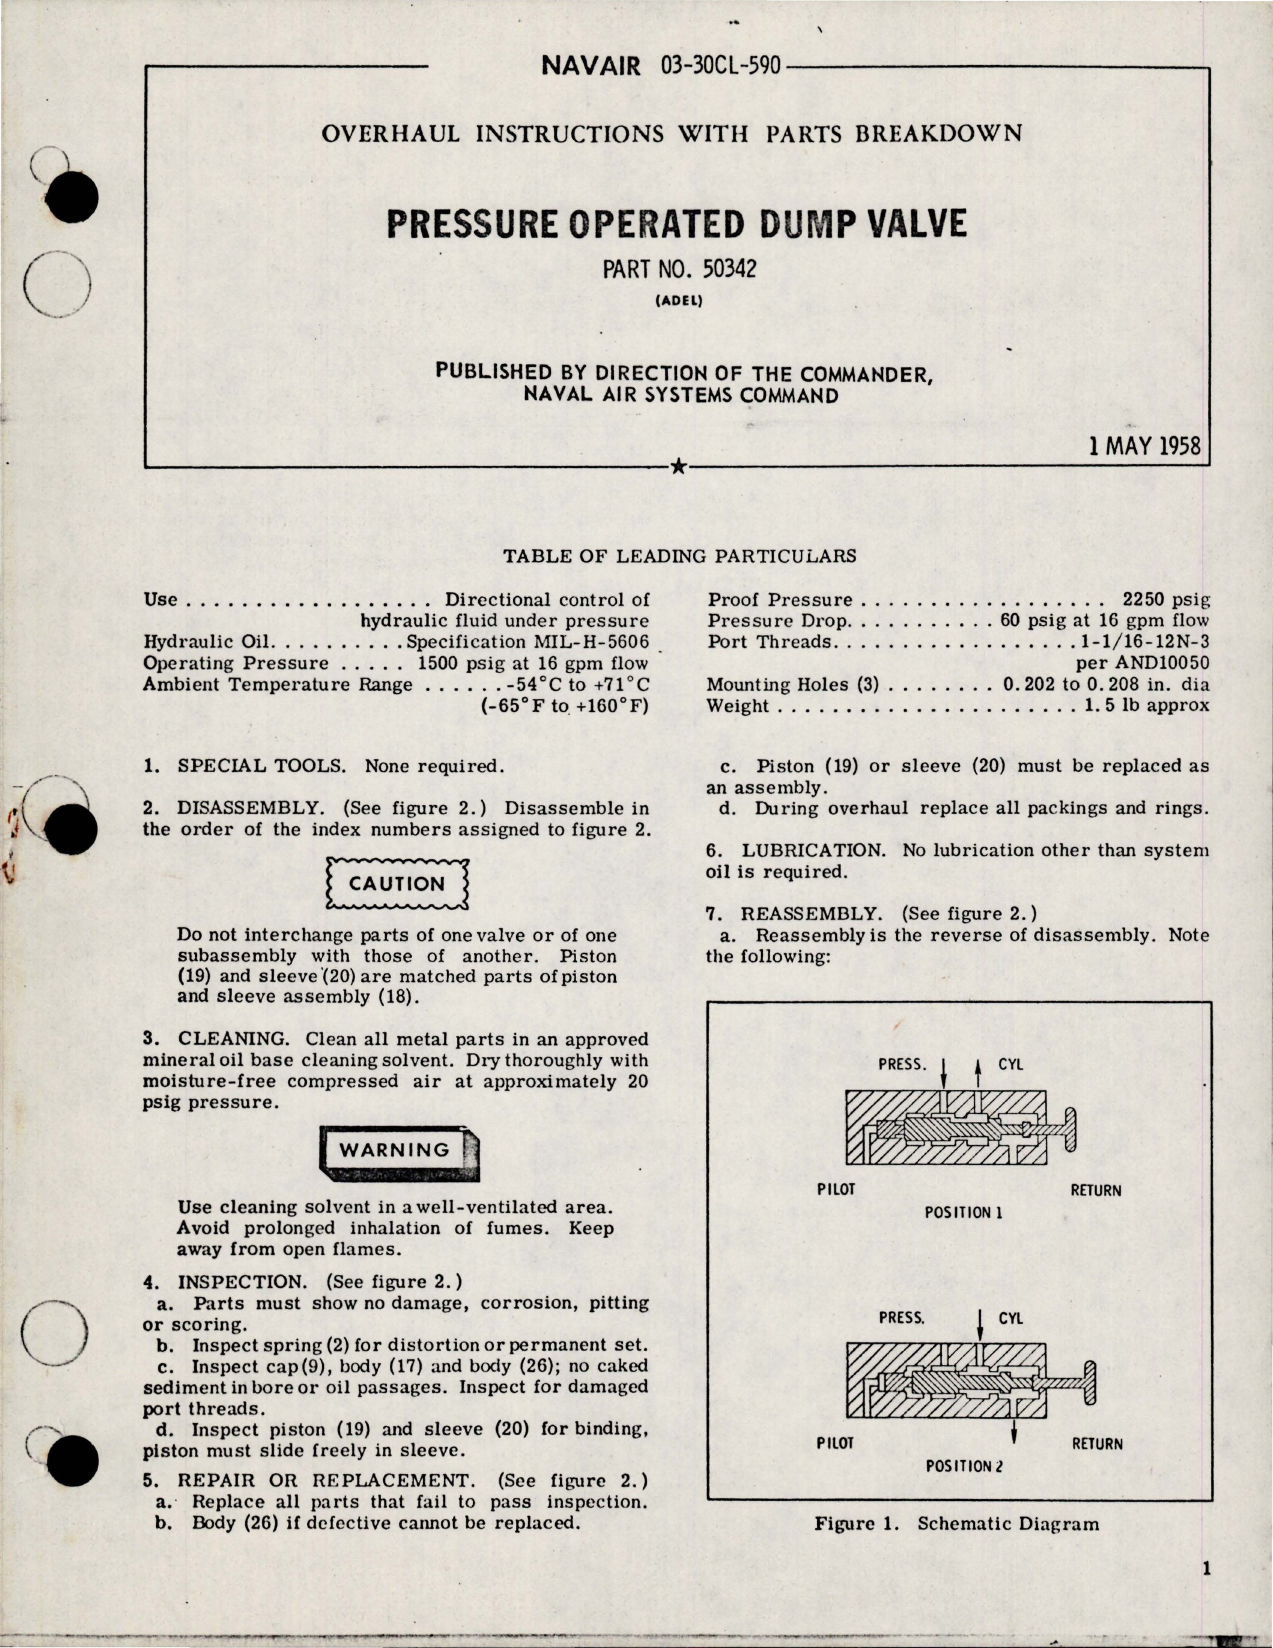 Sample page 1 from AirCorps Library document: Pressure Operated Dump Valve - Part 50342